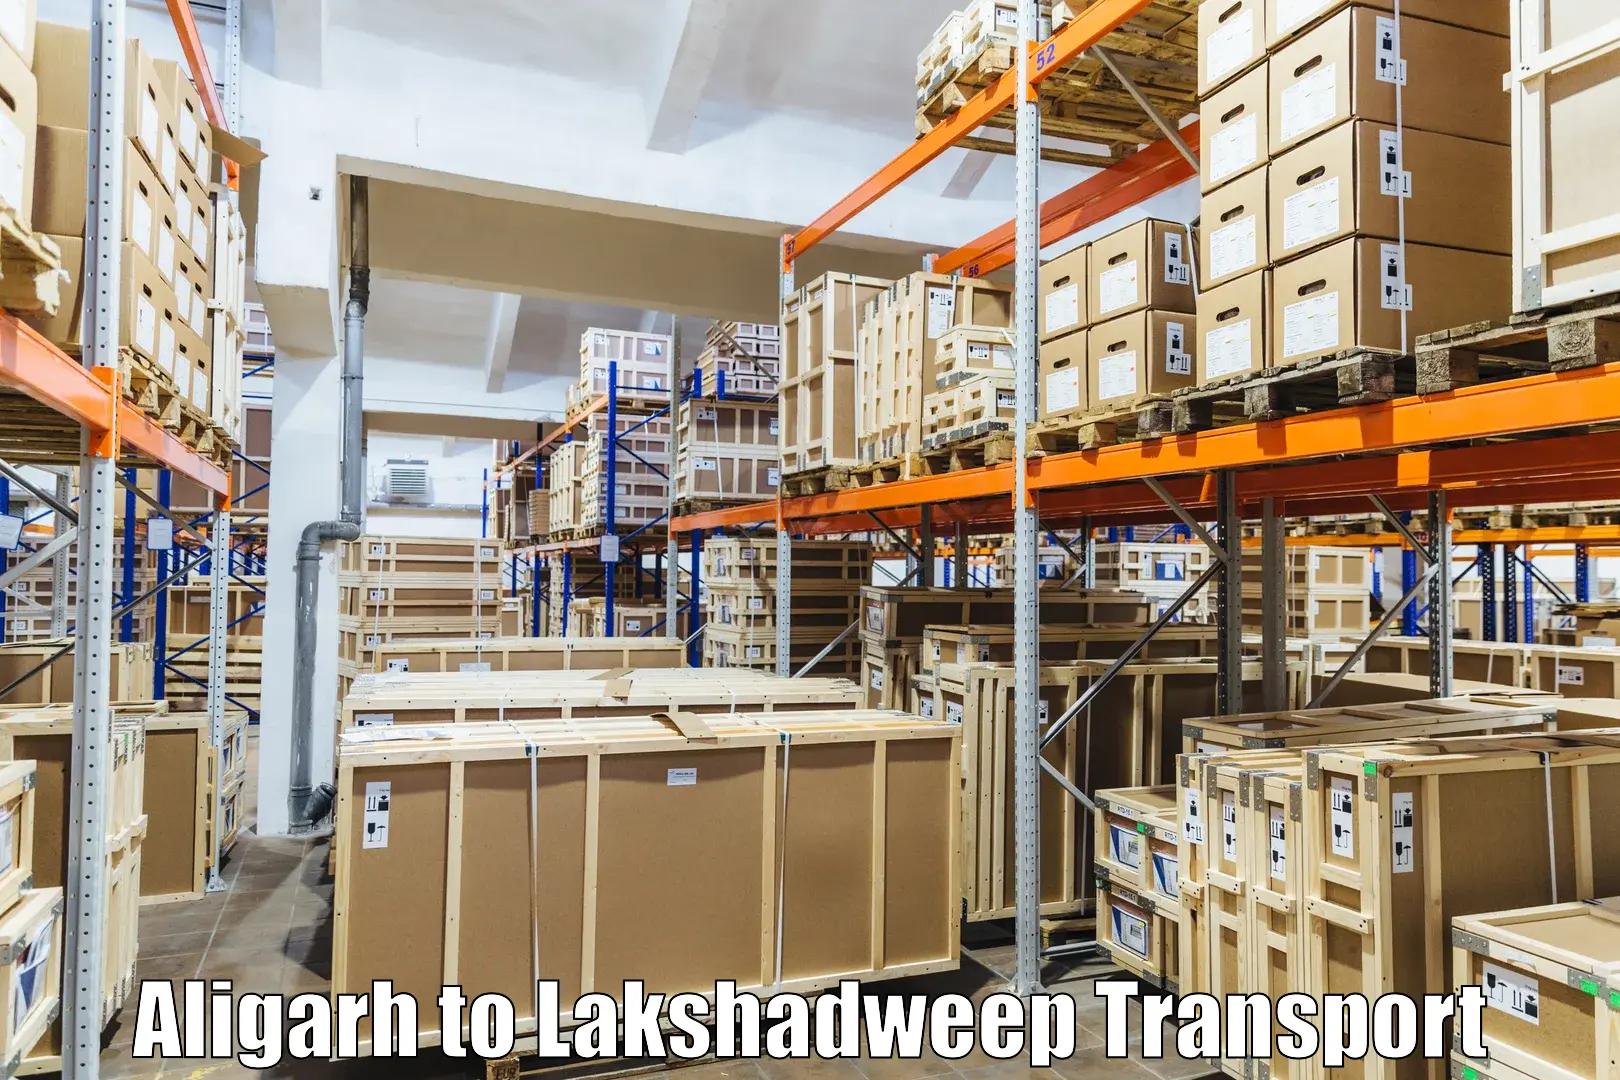 Commercial transport service Aligarh to Lakshadweep